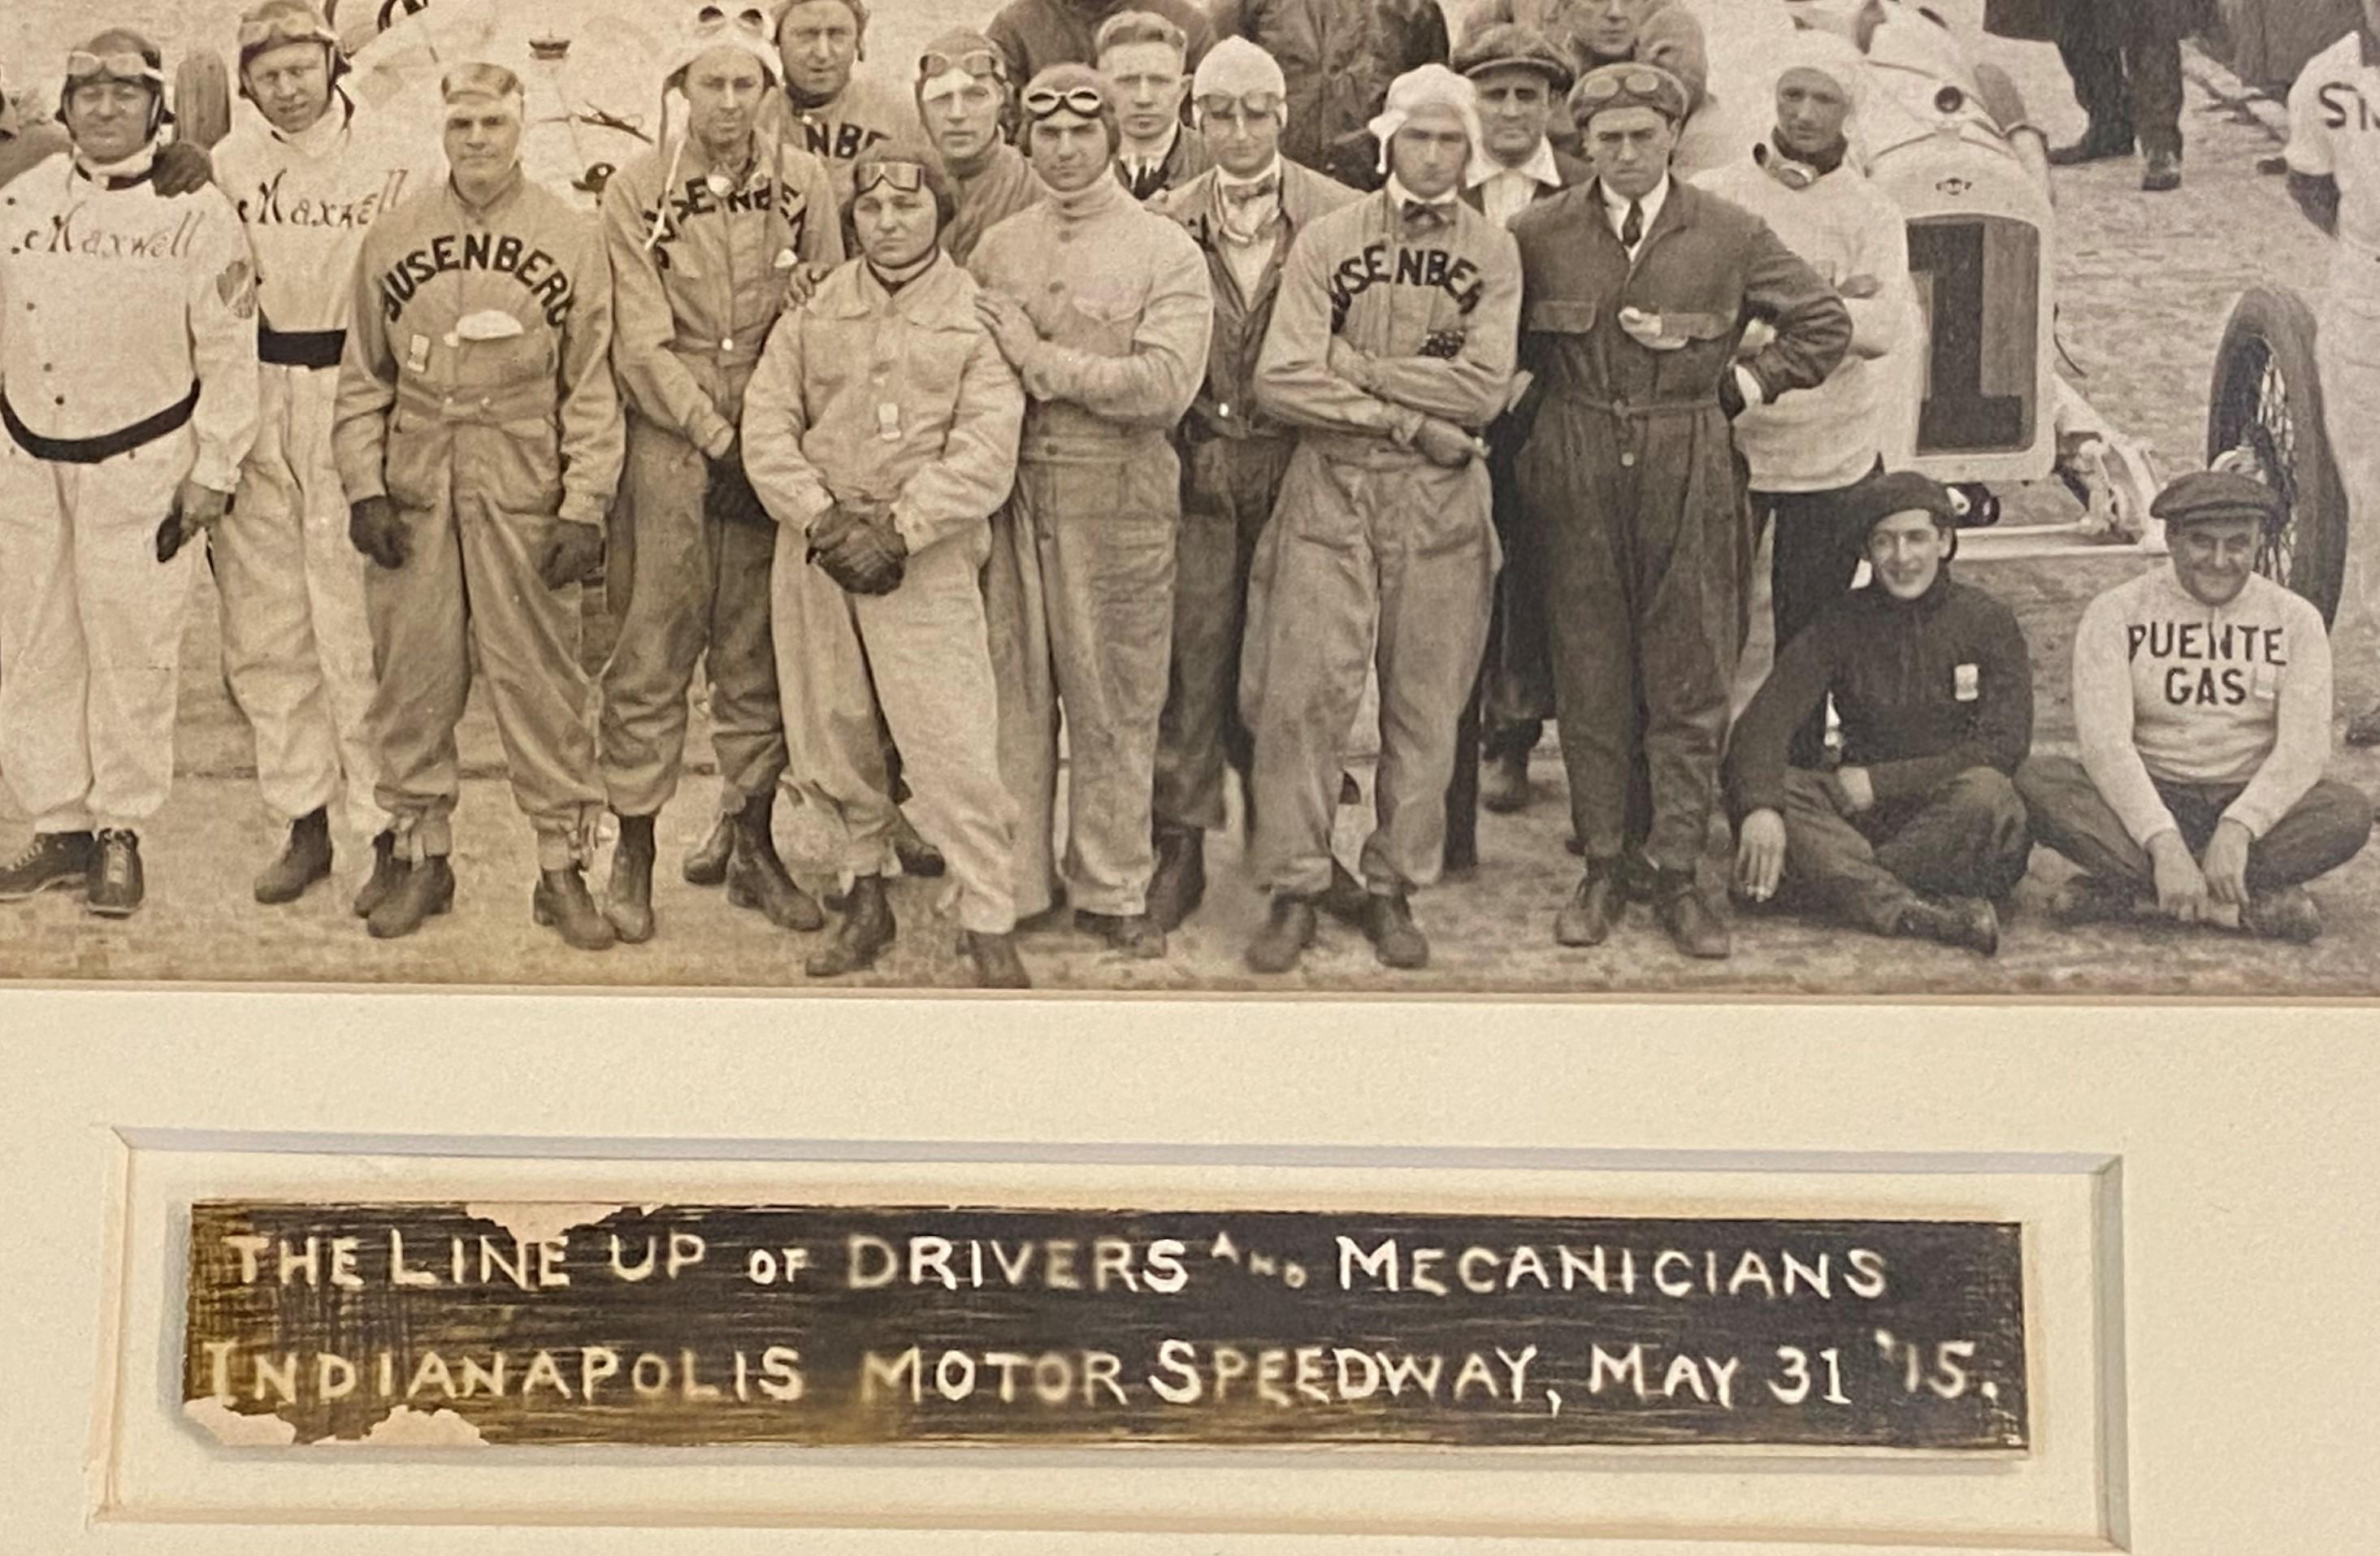 Early 20th Century Indianapolis 500 Panoramic Sepia Photograph of Drivers, Cars, & Mechanics, 1915